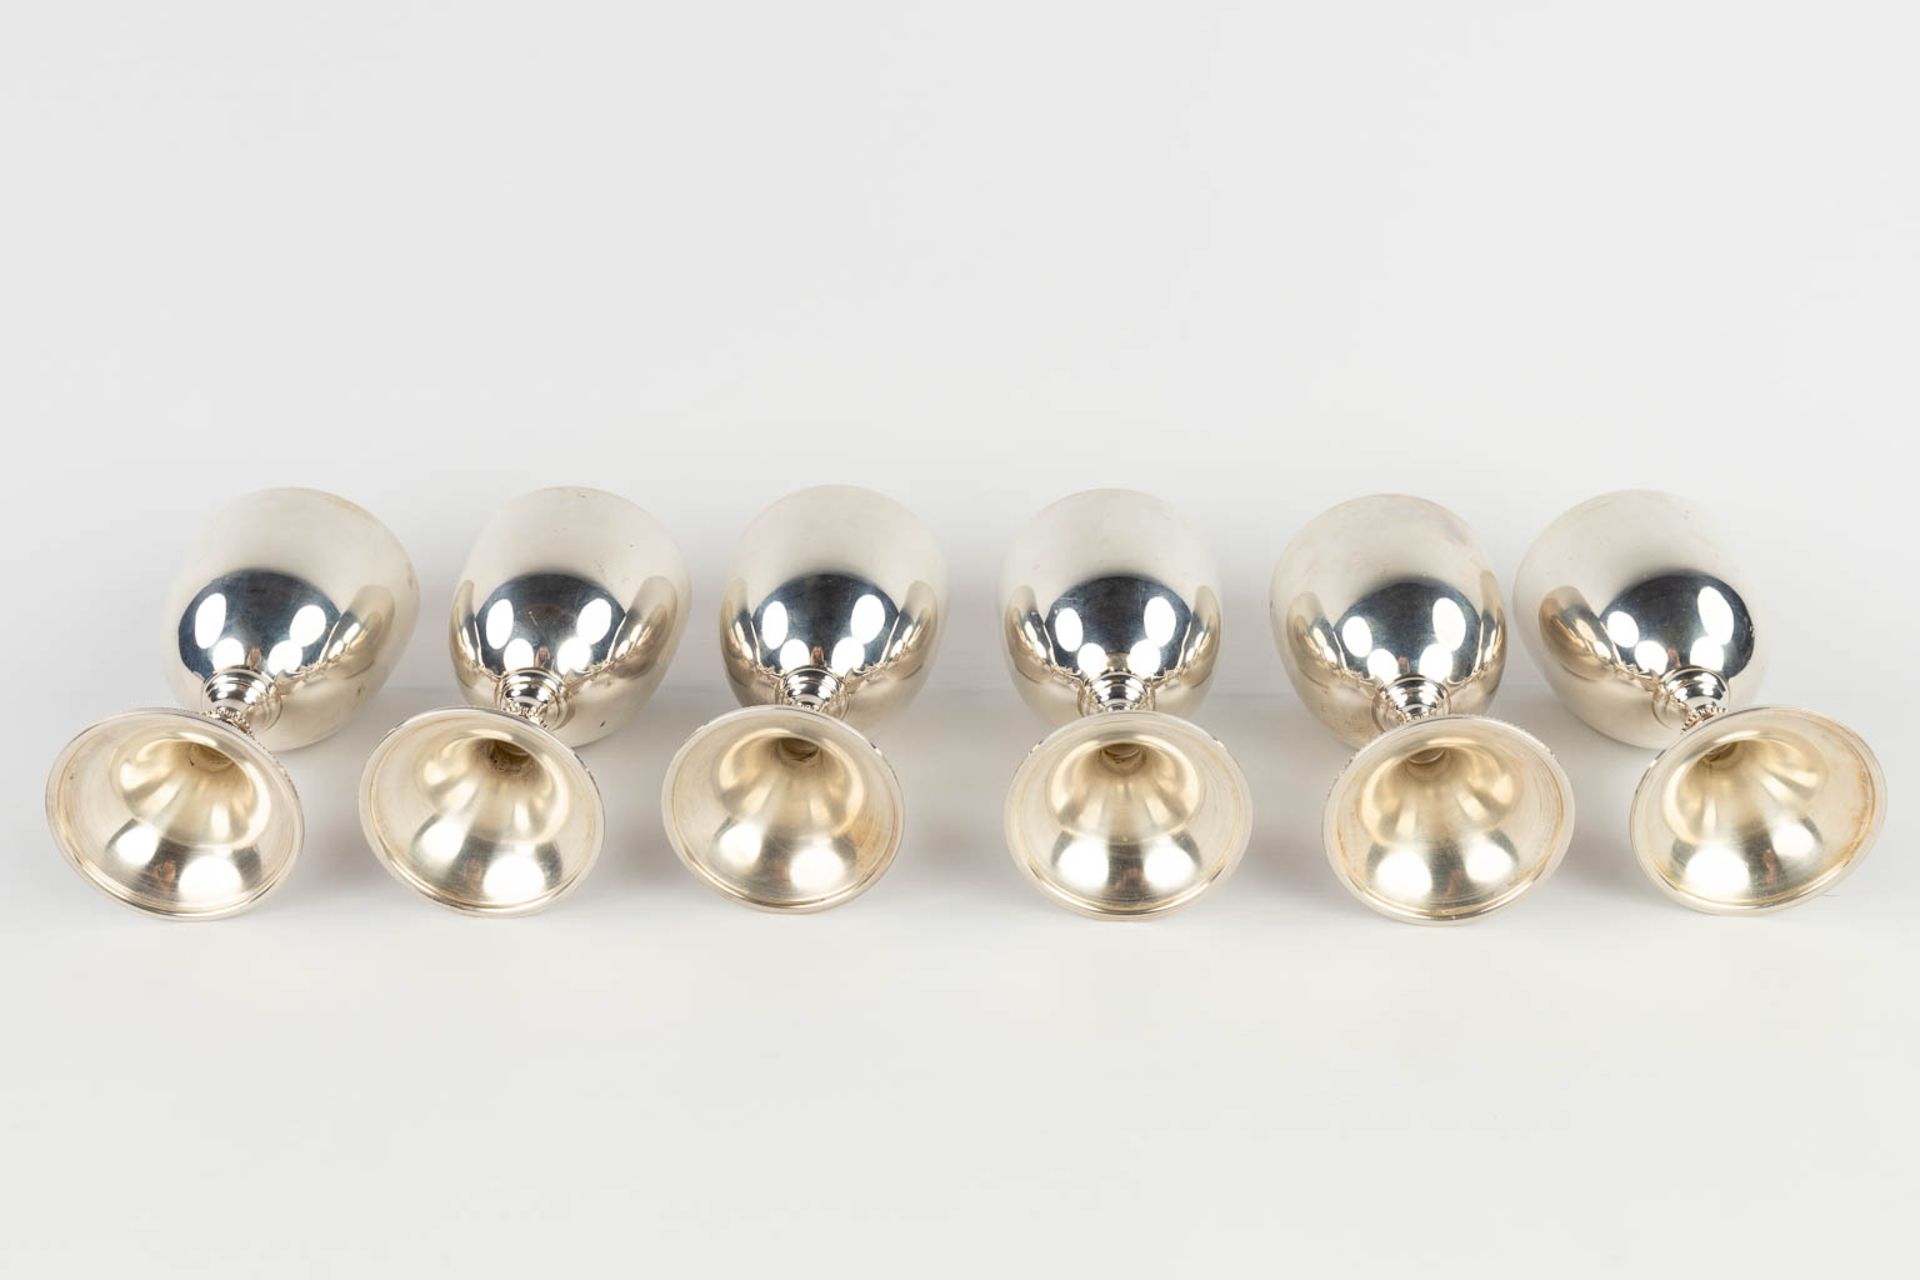 A set of 6 silver goblets, made by Trevor Towner in England, 1972. 1097g. (H: 14,5 x D: 7,5 cm) - Bild 6 aus 7